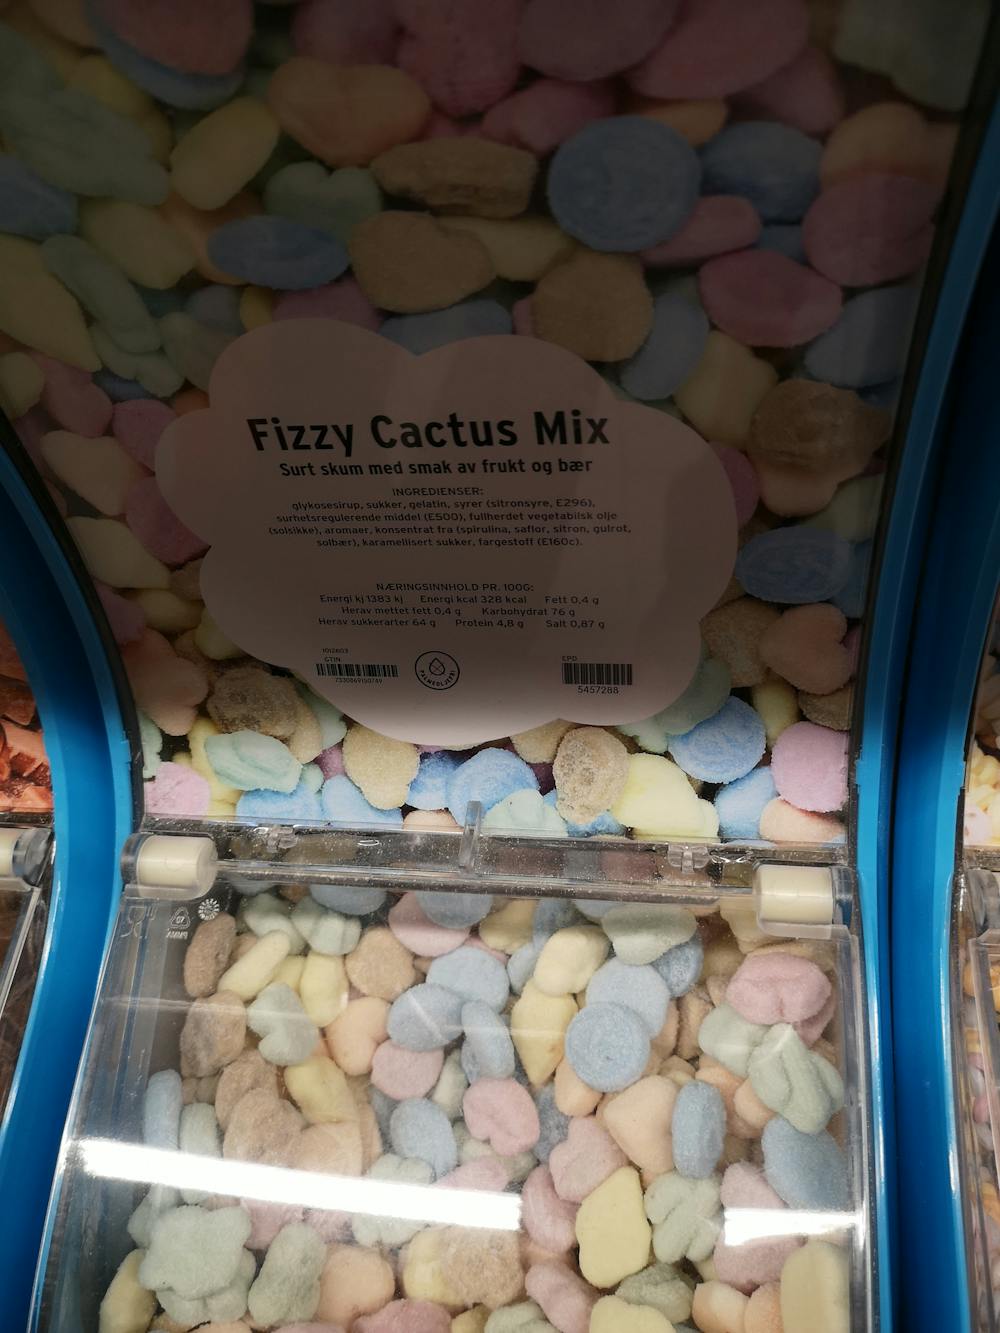 Fizzy cactus mix, Candy King